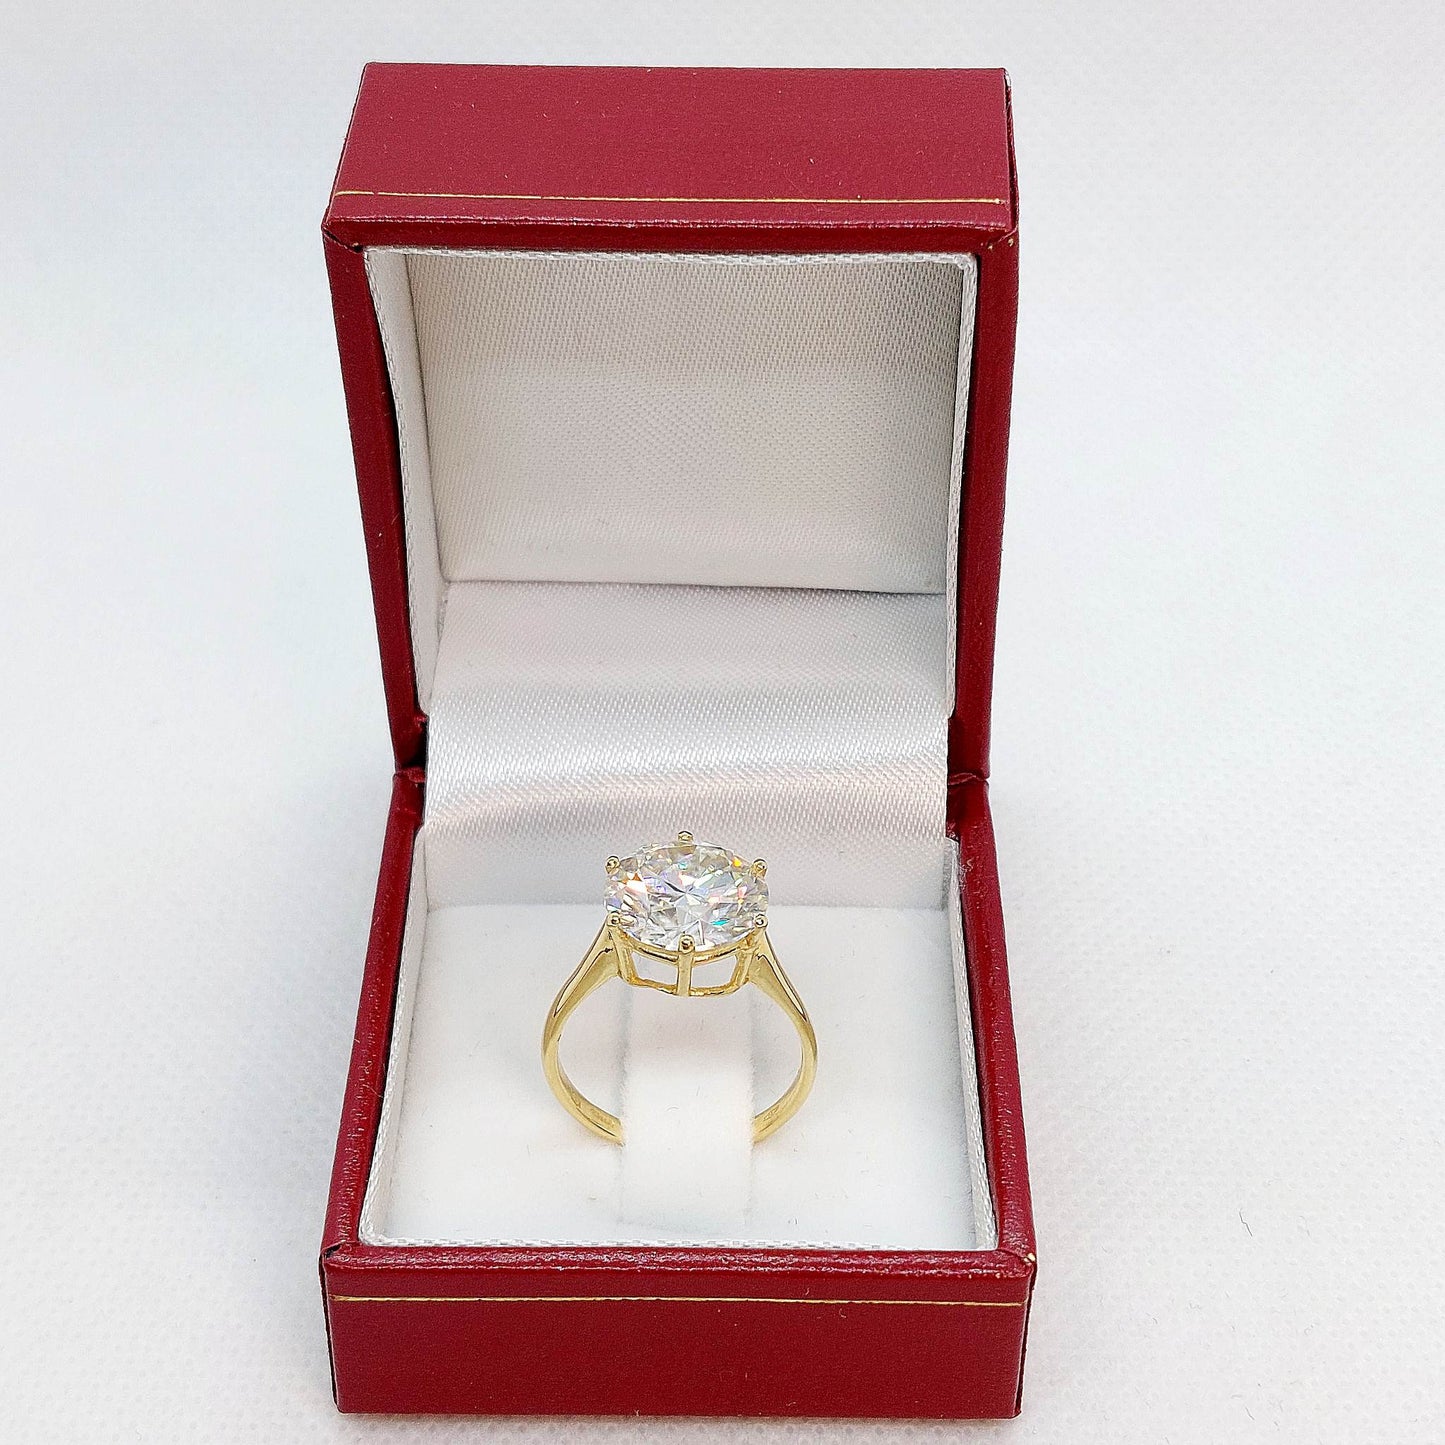 5ct Moissanite Diamond Ring in Solid 18K Gold and Made in Belgium